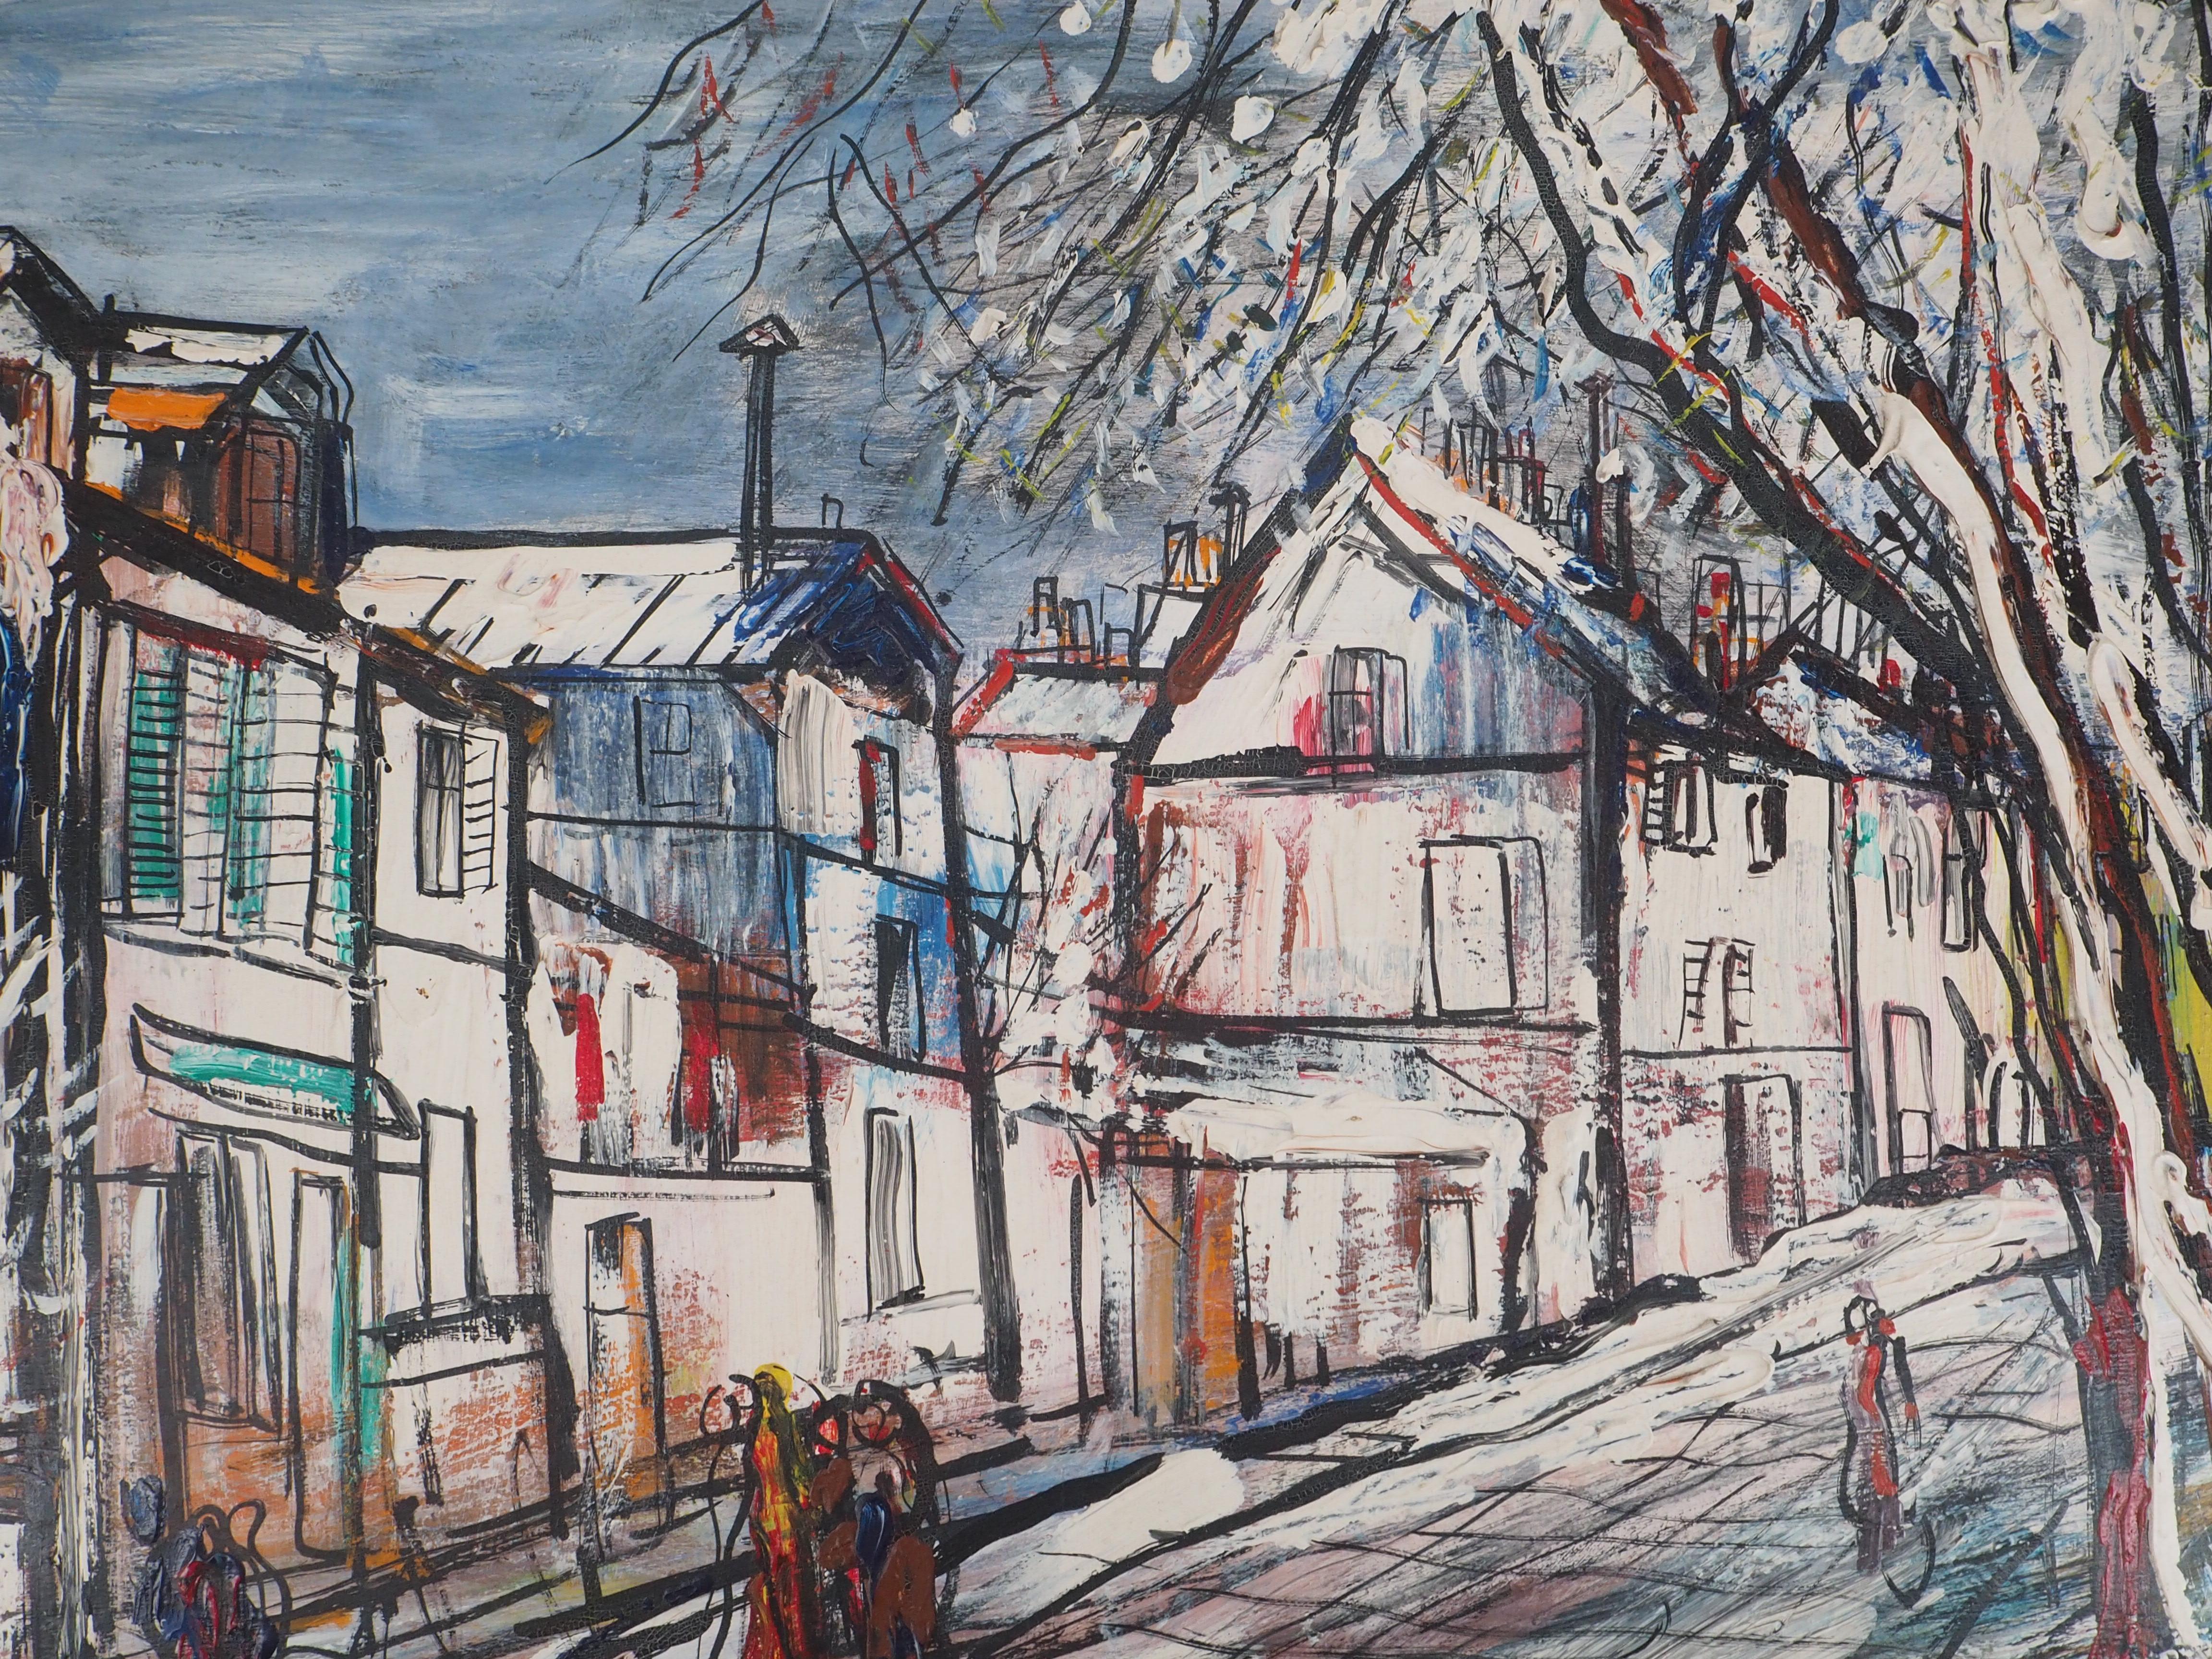 Michel Marie POULAIN
Paris : Snow in Montmartre, 1969

Original oil on wood panel
Handsigned in the lower left corner
Signed, dated and titled on the back
On wood panel 65 x 81 cm (c. 26 x 32 inch)
Presented in golden wood frame 89 x 105 cm (c. 36 x